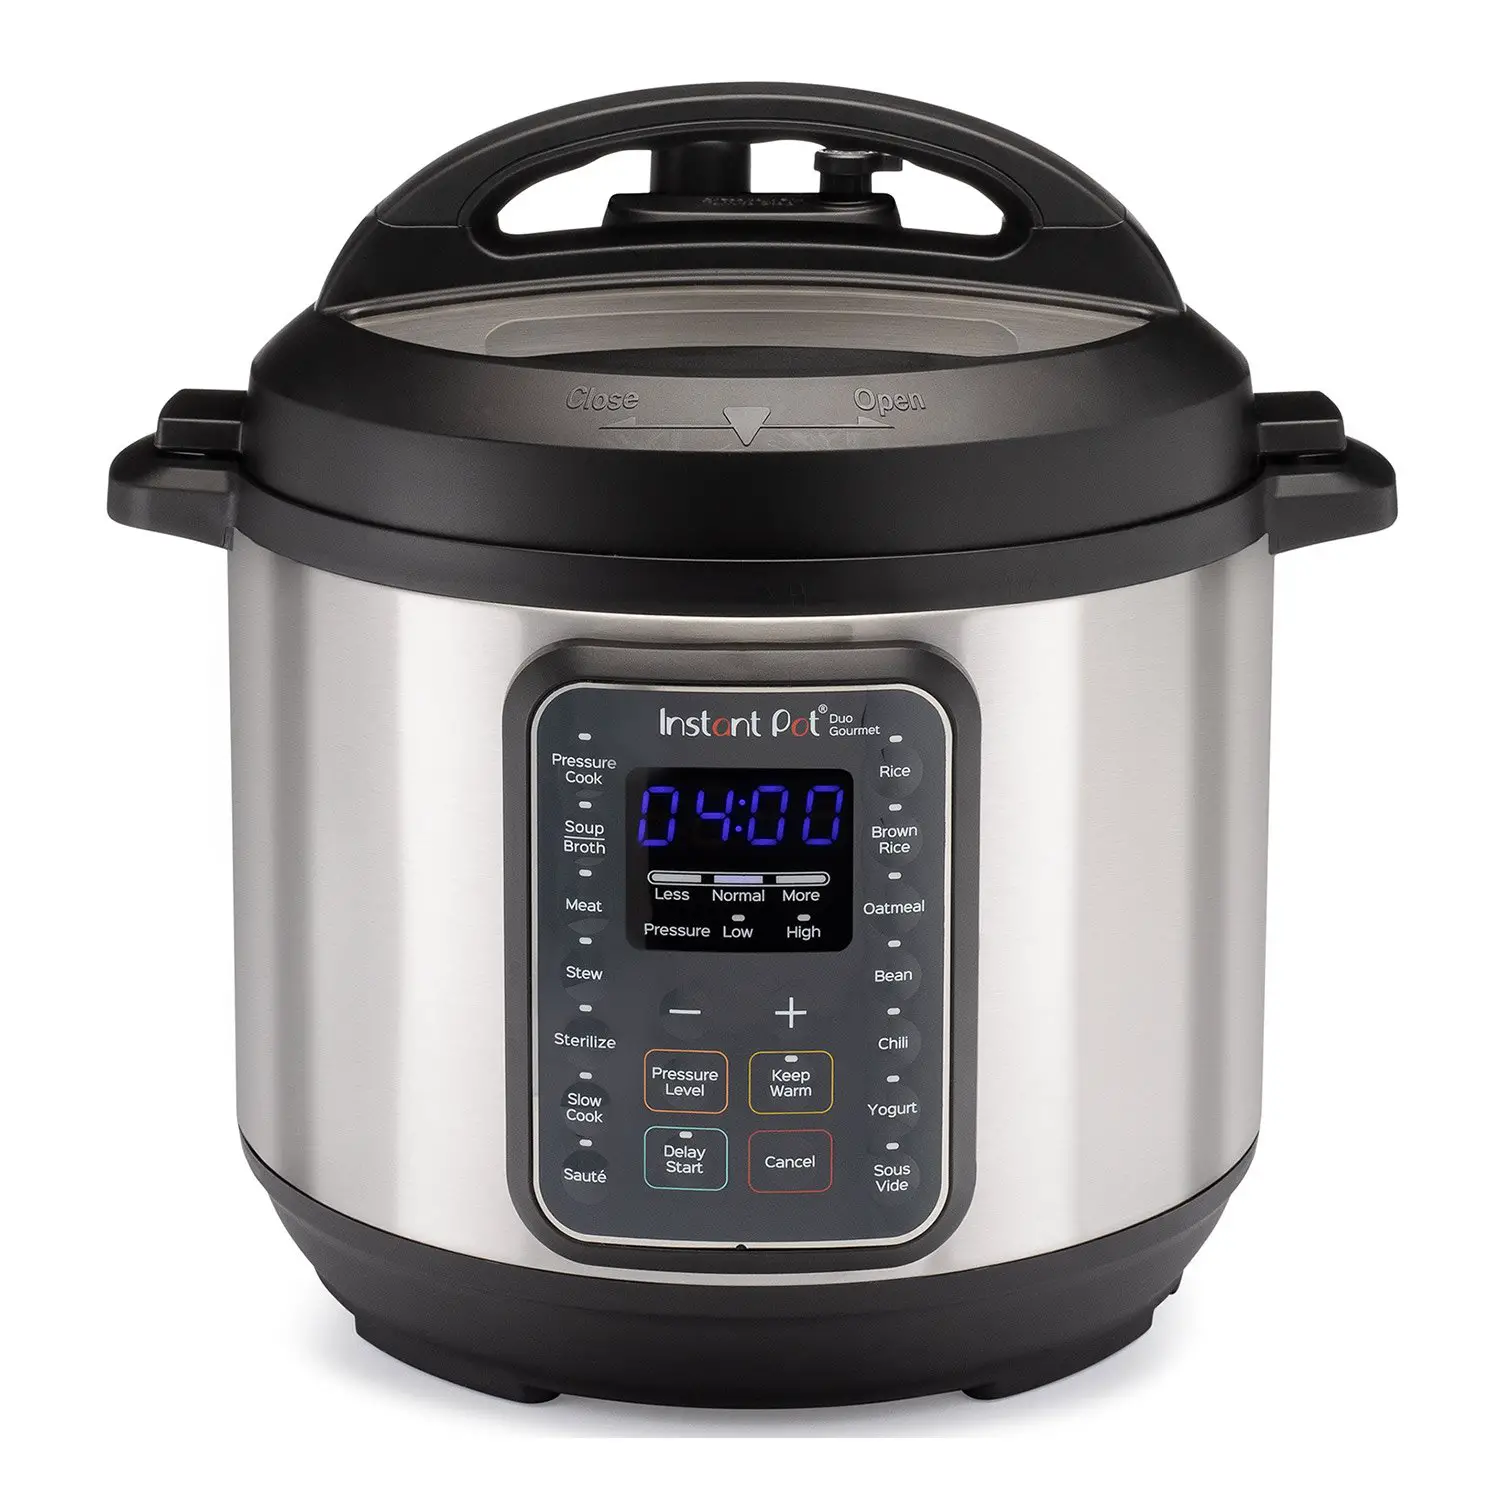 How To Cook Brown Rice In Instant Pot Duo Gourmet